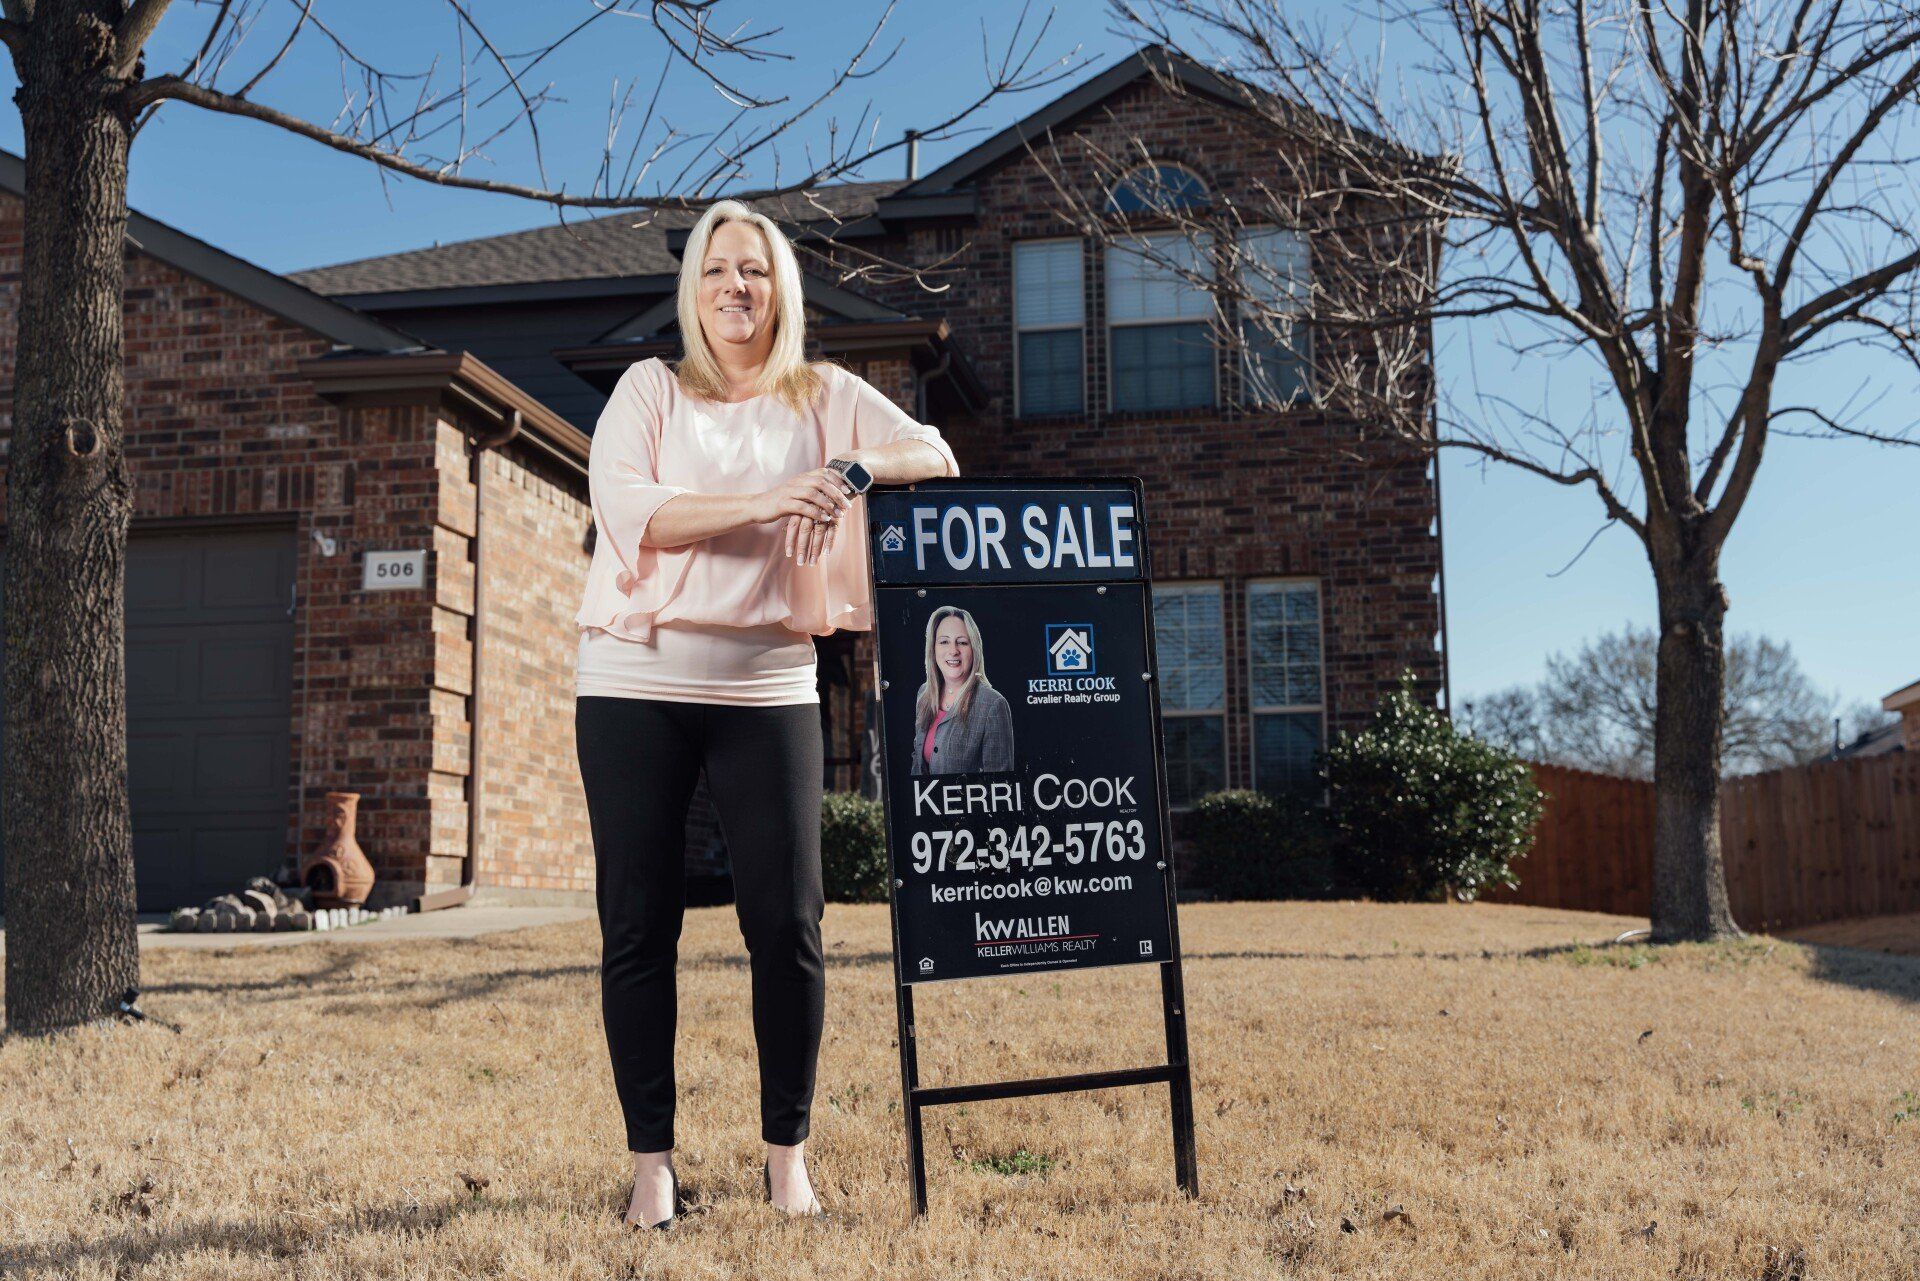 A woman is standing in front of a house holding a for sale sign.